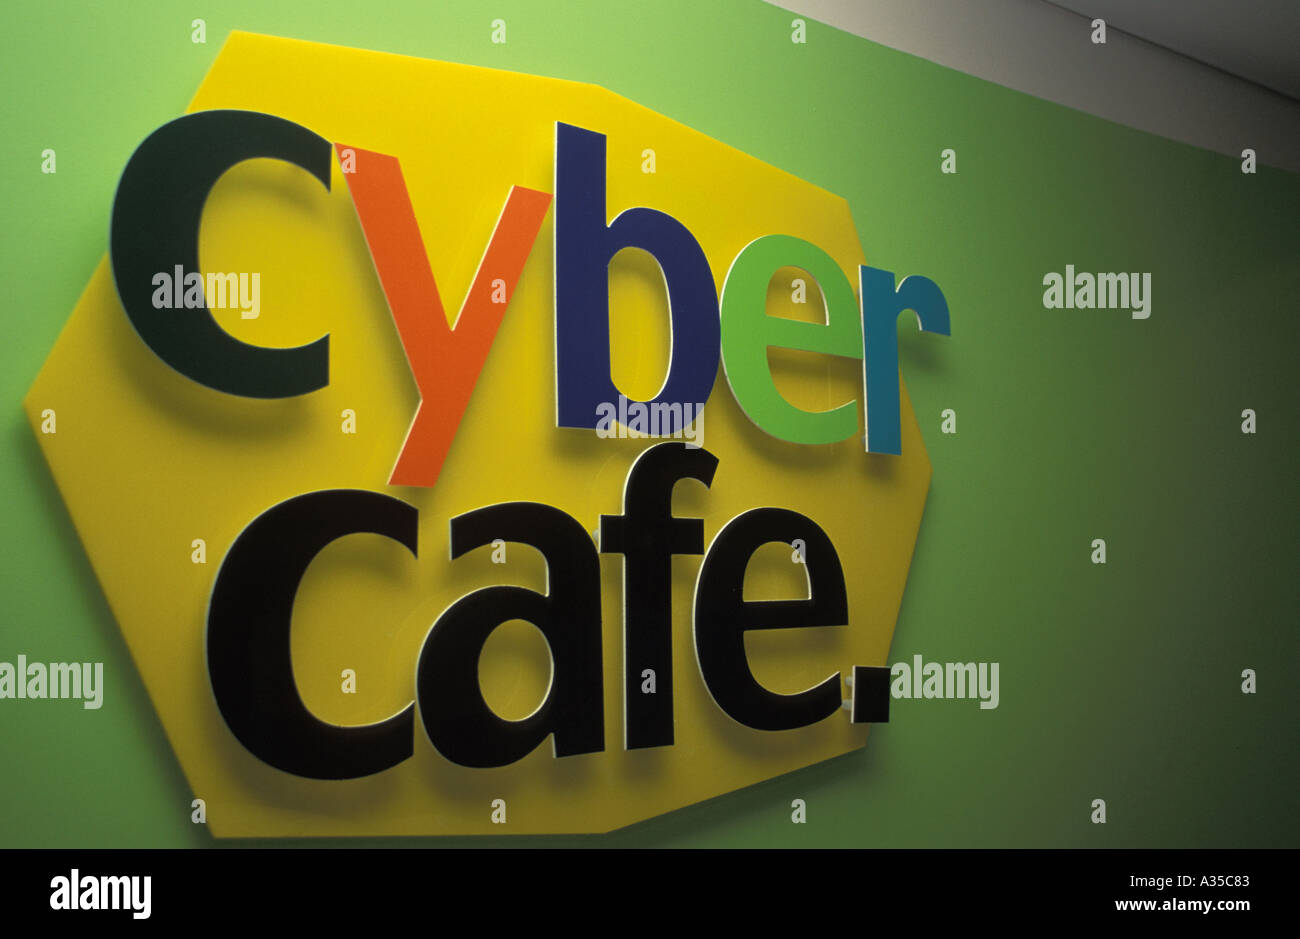 Cyber Cafe HD Images -